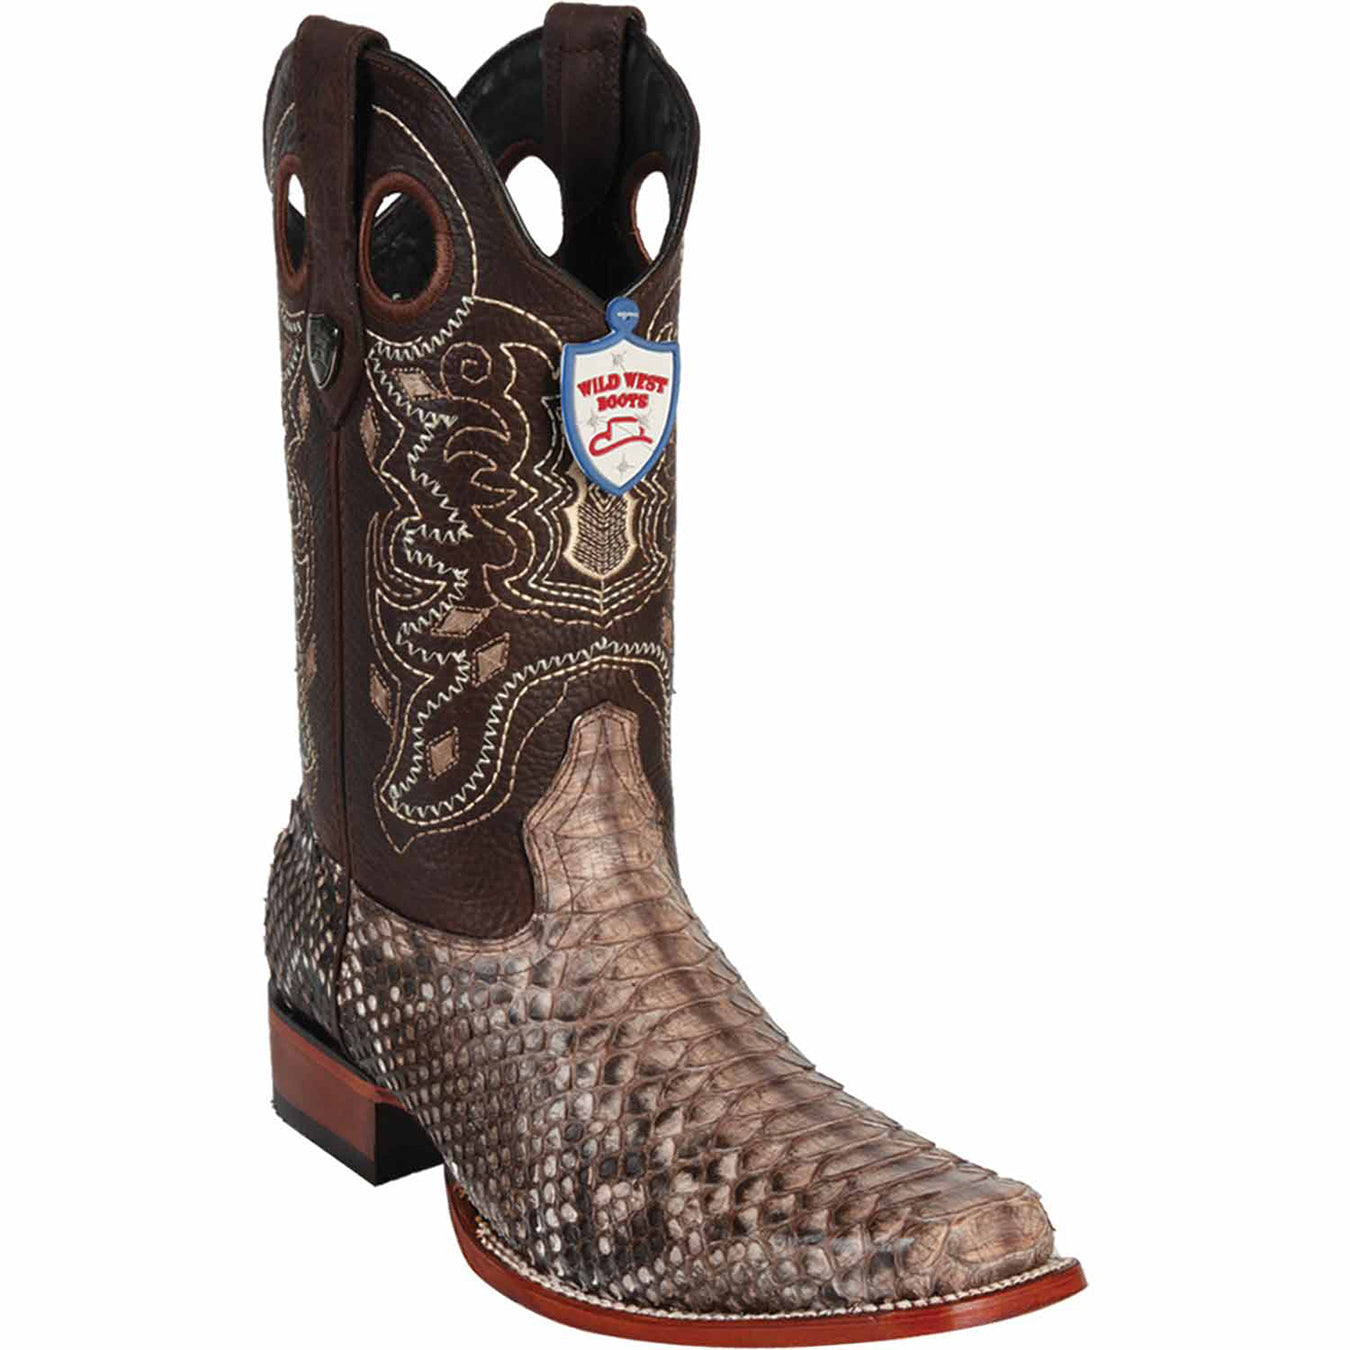 Mens Square Toe Cowboy Boots Snakeskin - Wild West Boots